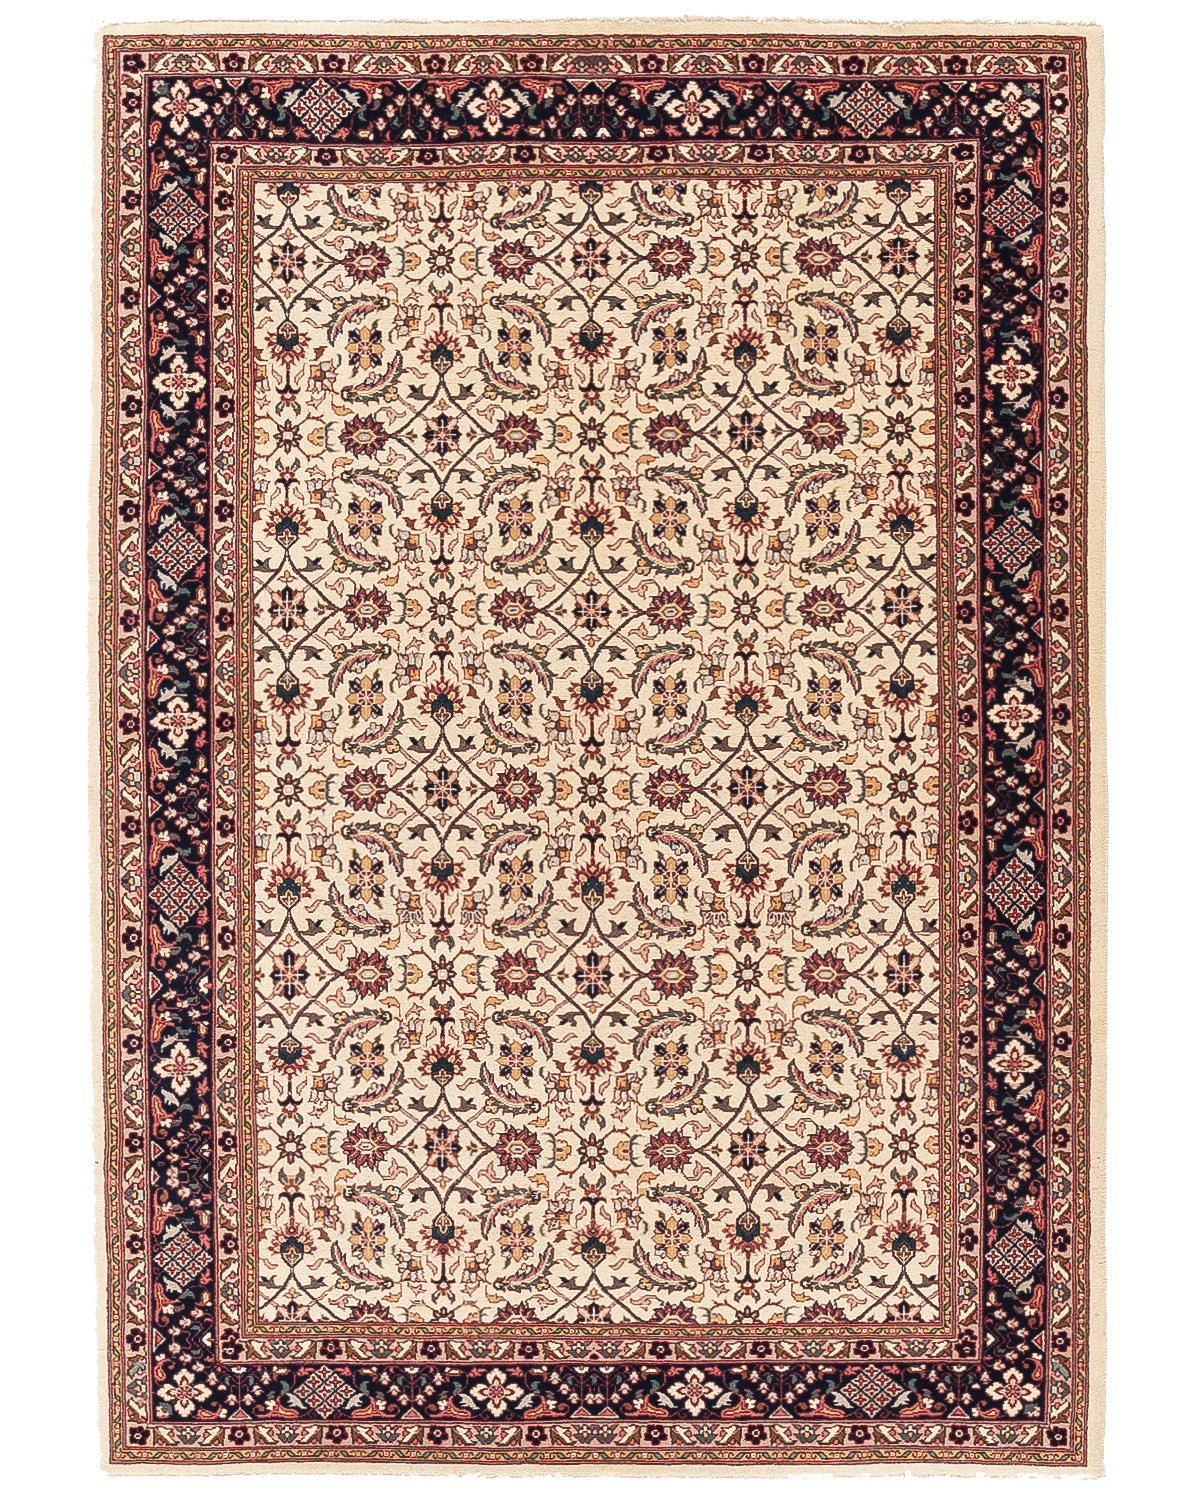 Oriental Rug Anatolian Hand Knotted Wool On Cotton 127 X 180 Cm - 4' 2'' X 5' 11'' Sand C007 ER01